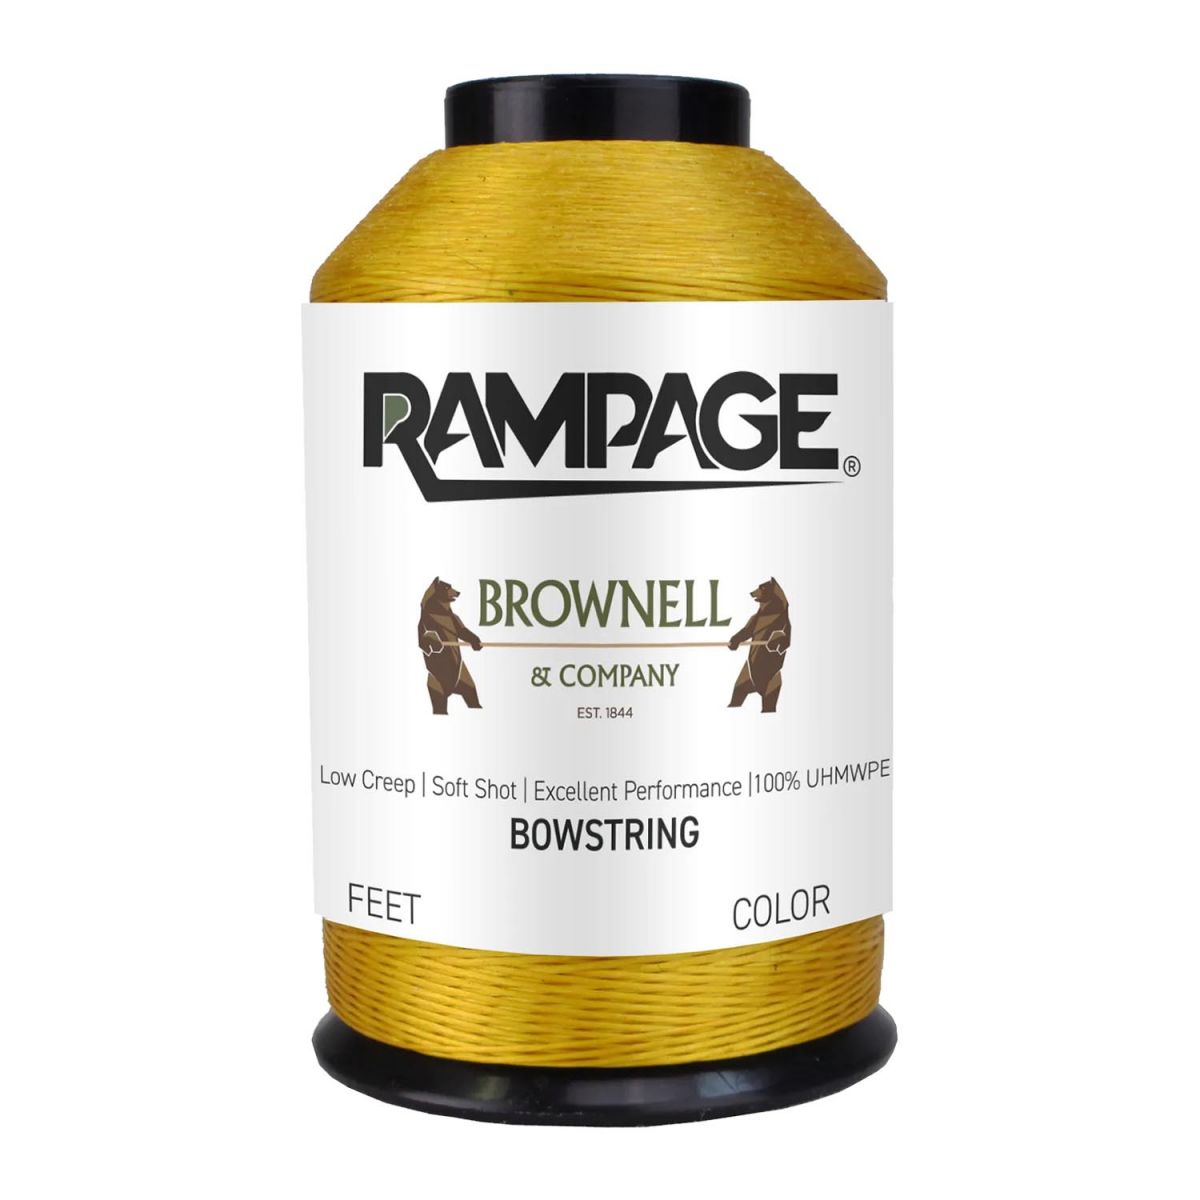 Brownell Sehnengarn Rampage 1/4 lbs